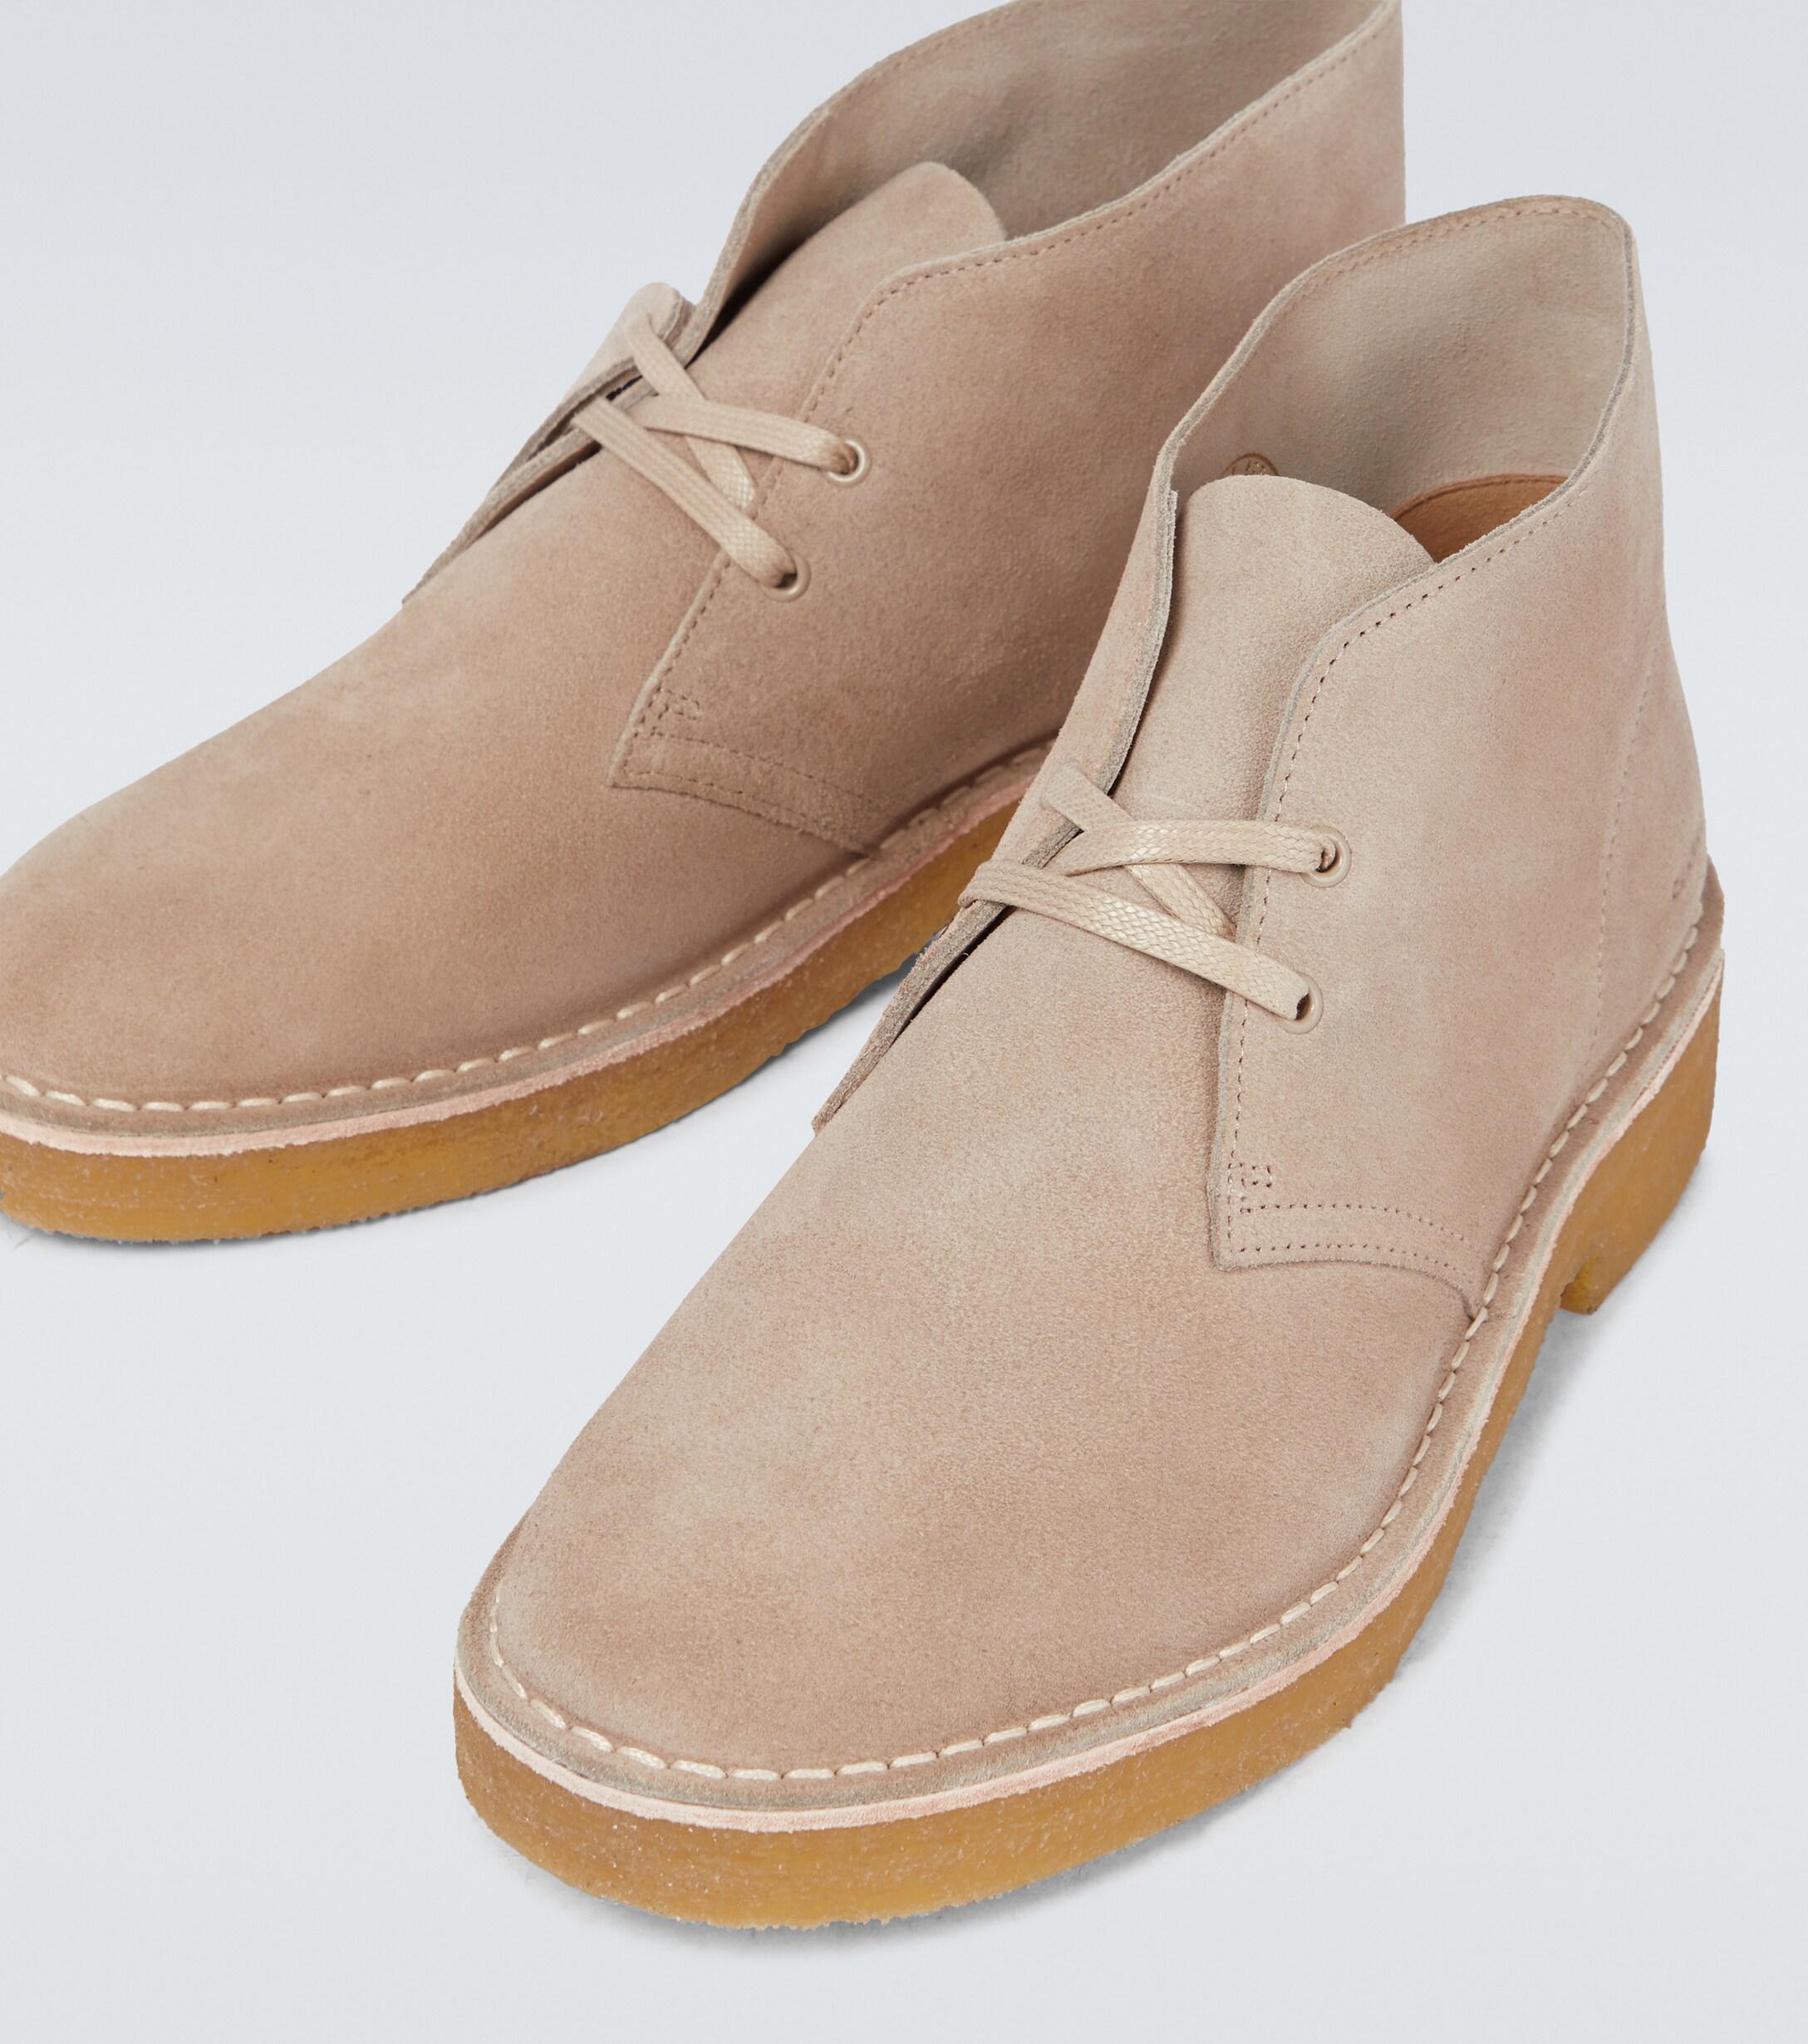 Clarks Suede Desert Boot 221 Shoes in Beige (Natural) for Men - Lyst